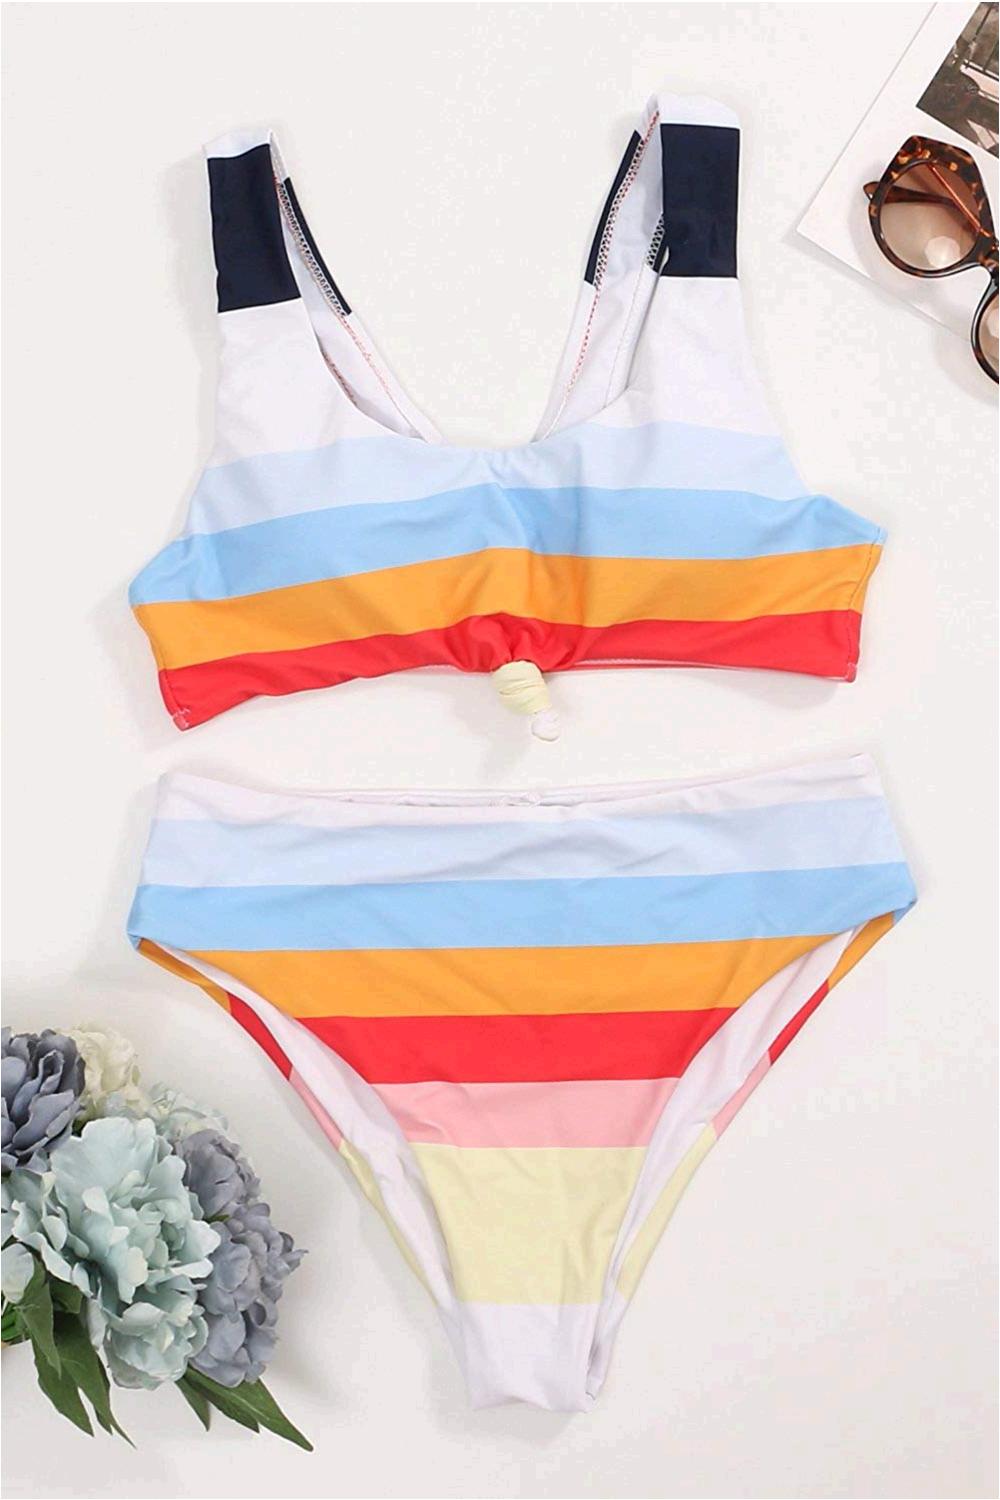 Honlyps Two Piece High Waisted Bathing Suit Striped Bikini, MultiColor ...